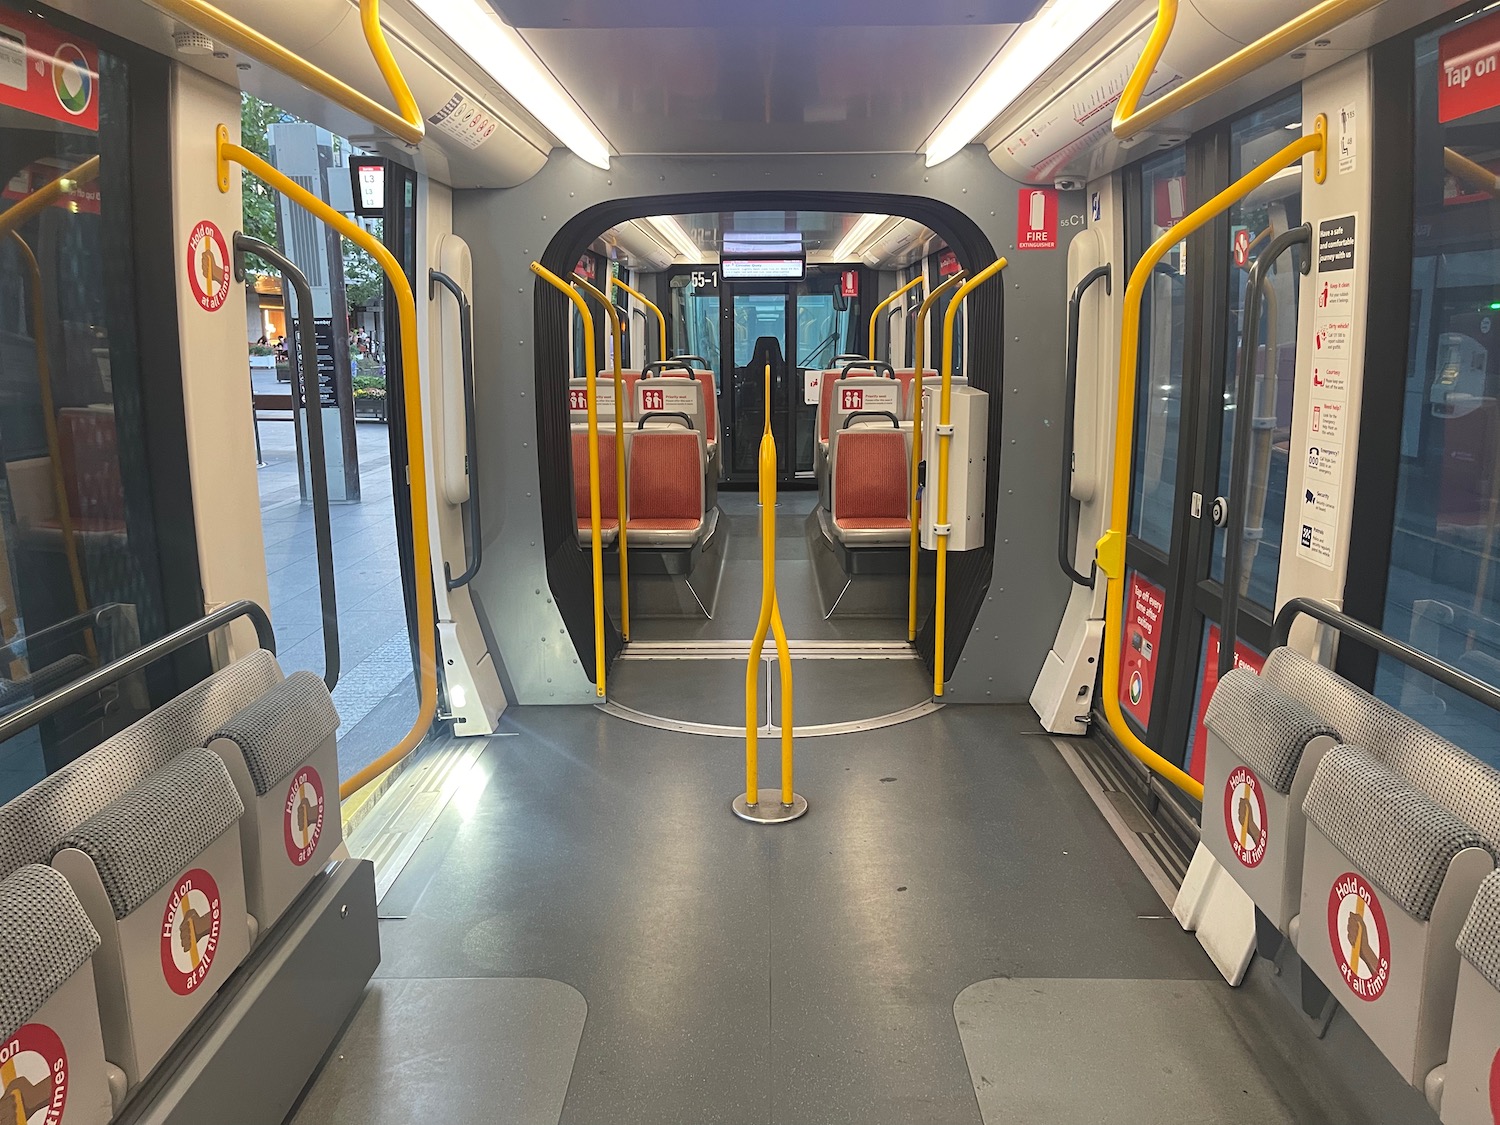 inside a bus with yellow handrails